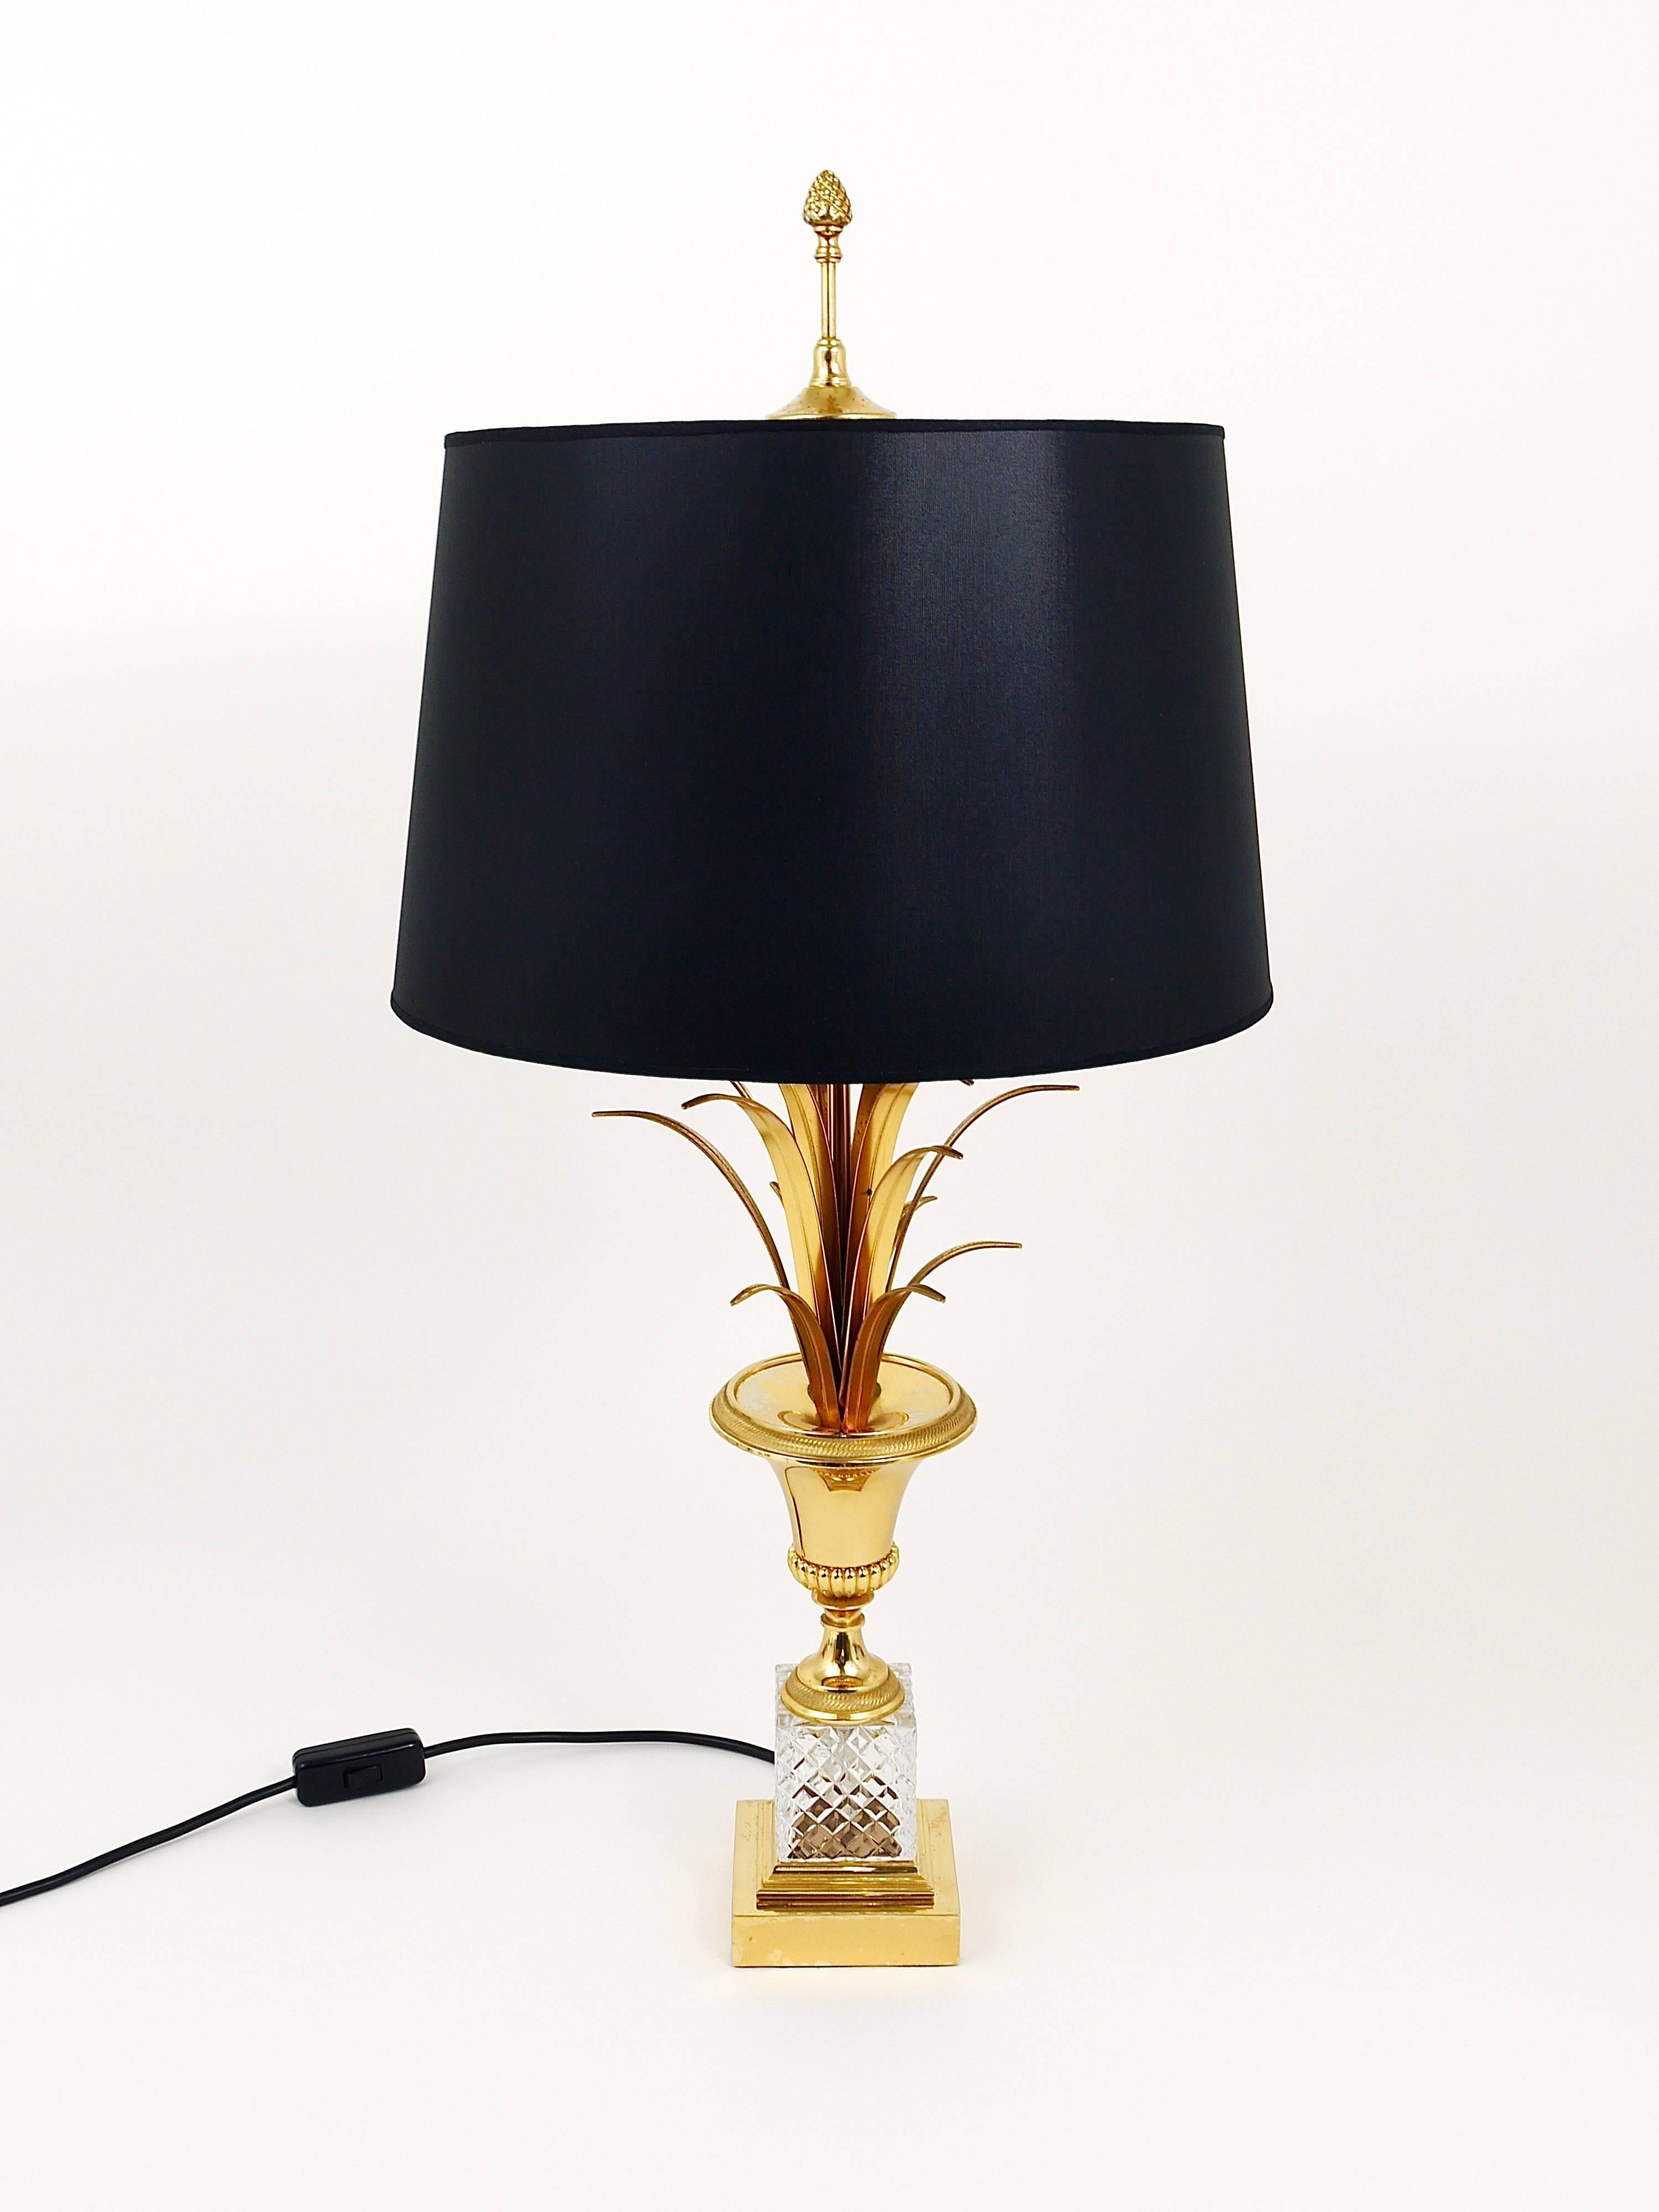 Gold Hollywood Regency Gilt Brass and Glass Pineapple Leaf Table Lamp, France, 1970s For Sale